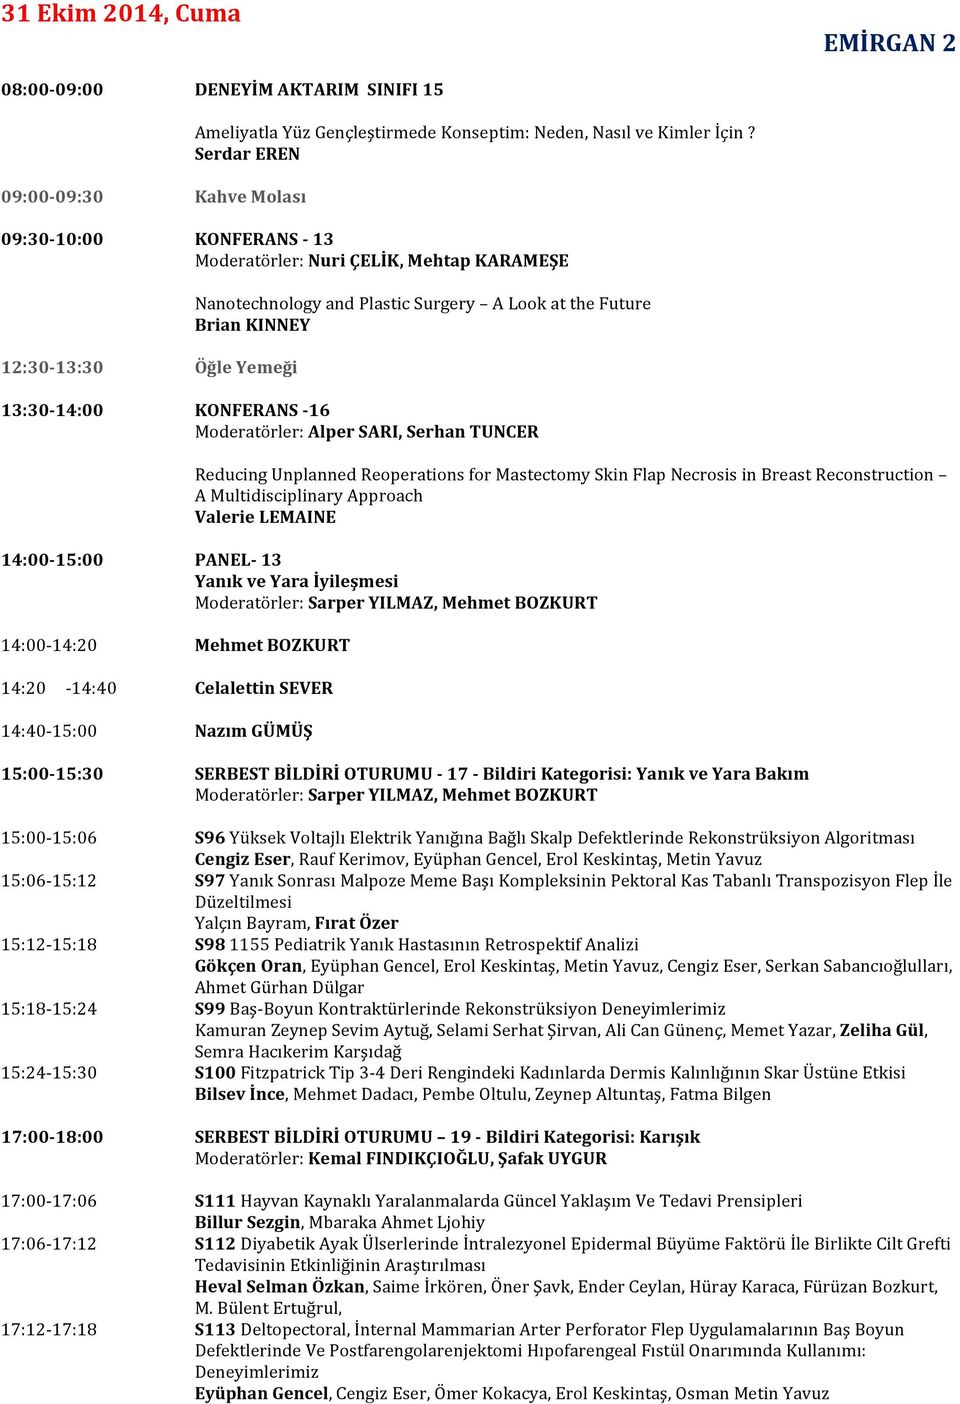 Moderatörler: Alper SARI, Serhan TUNCER Reducing Unplanned Reoperations for Mastectomy Skin Flap Necrosis in Breast Reconstruction A Multidisciplinary Approach Valerie LEMAINE 14:00-15:00 14:00-14:20